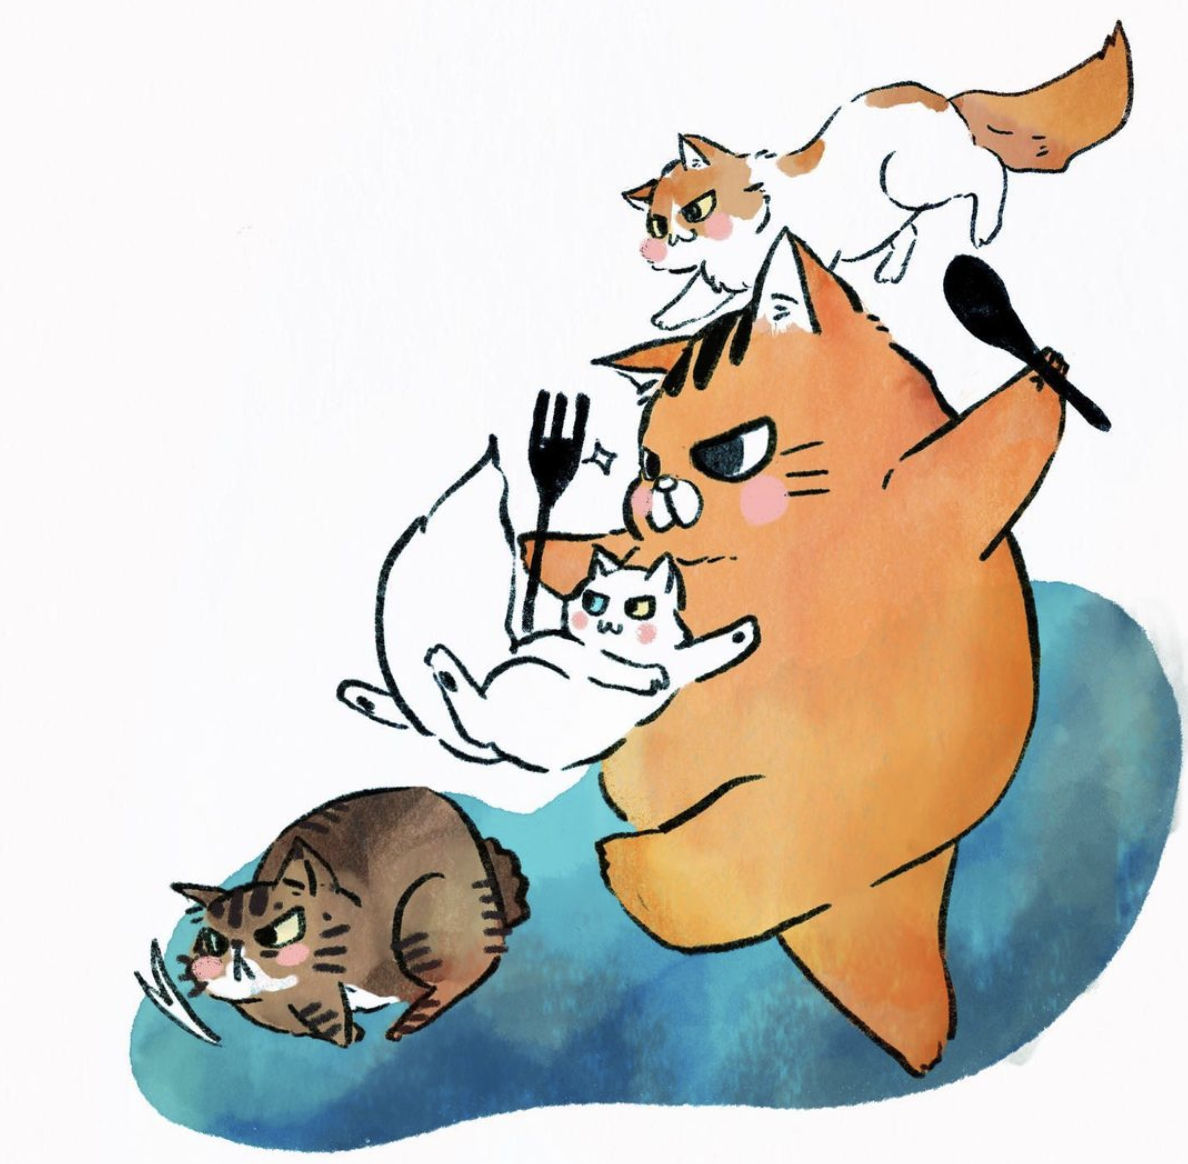 Artist's illustration of dinner time with her cats. The artist's caricature is a large orange cat while the three other runs together towards dinner.